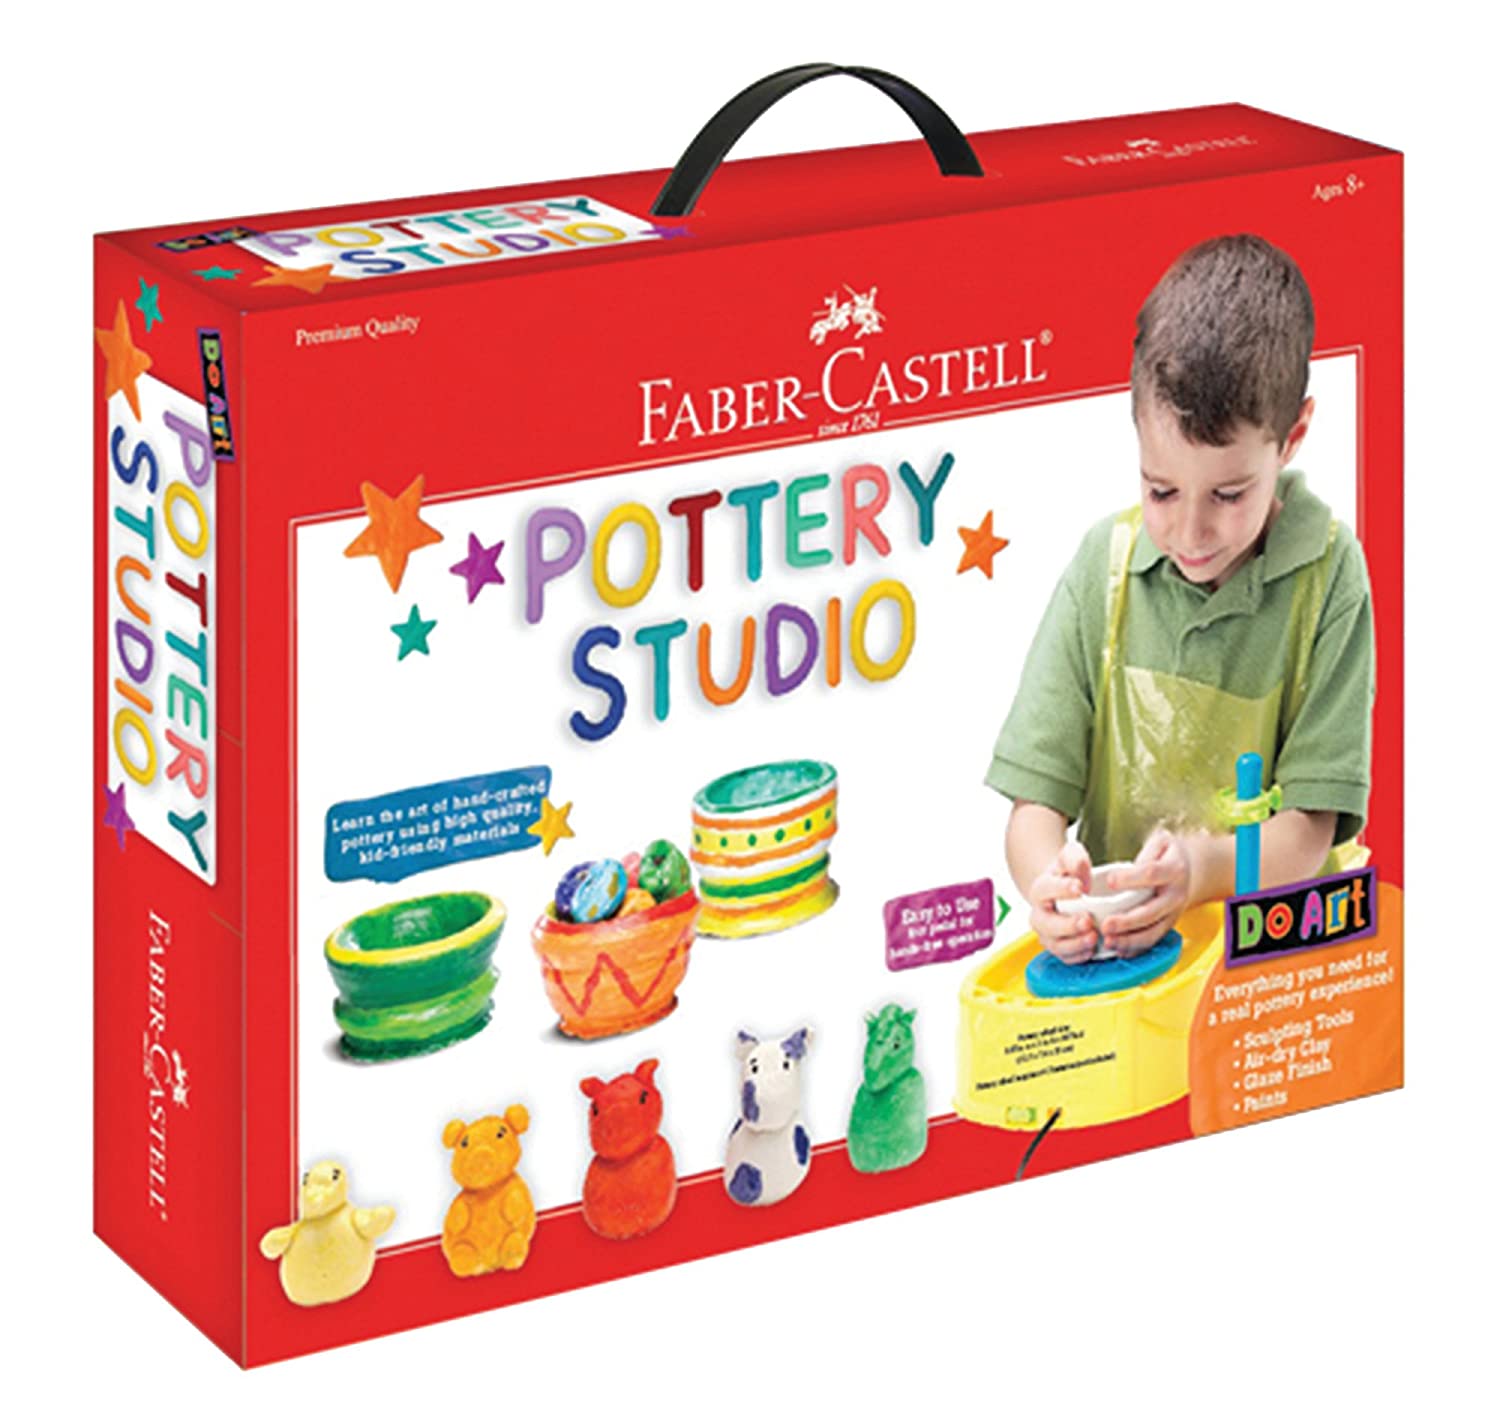 Top 7 Best Pottery Wheels for Kids Reviews in 2022 1